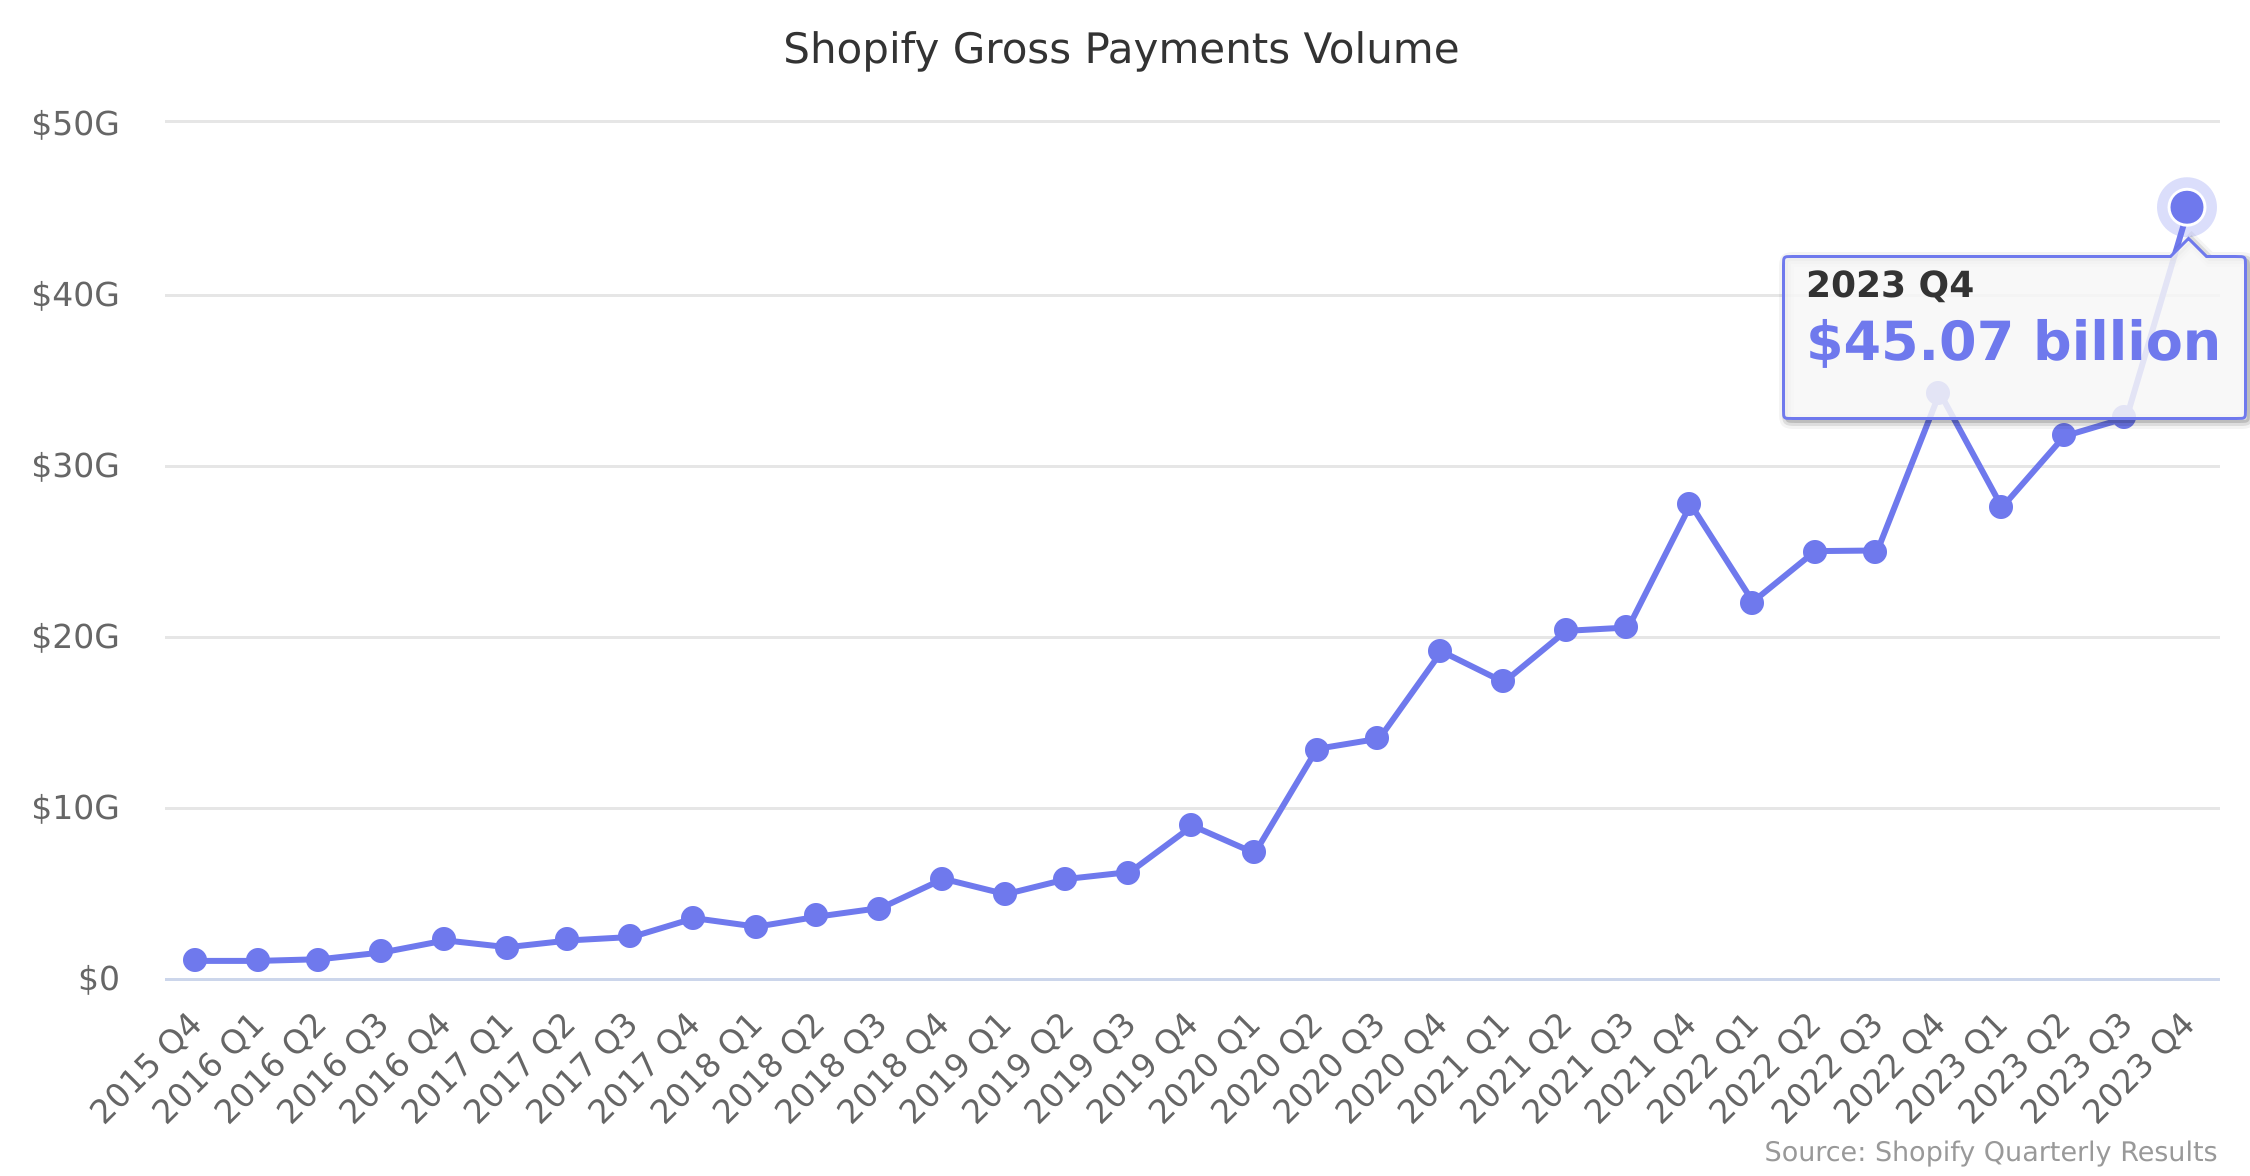 Shopify Gross Payments Volume 2015-2023